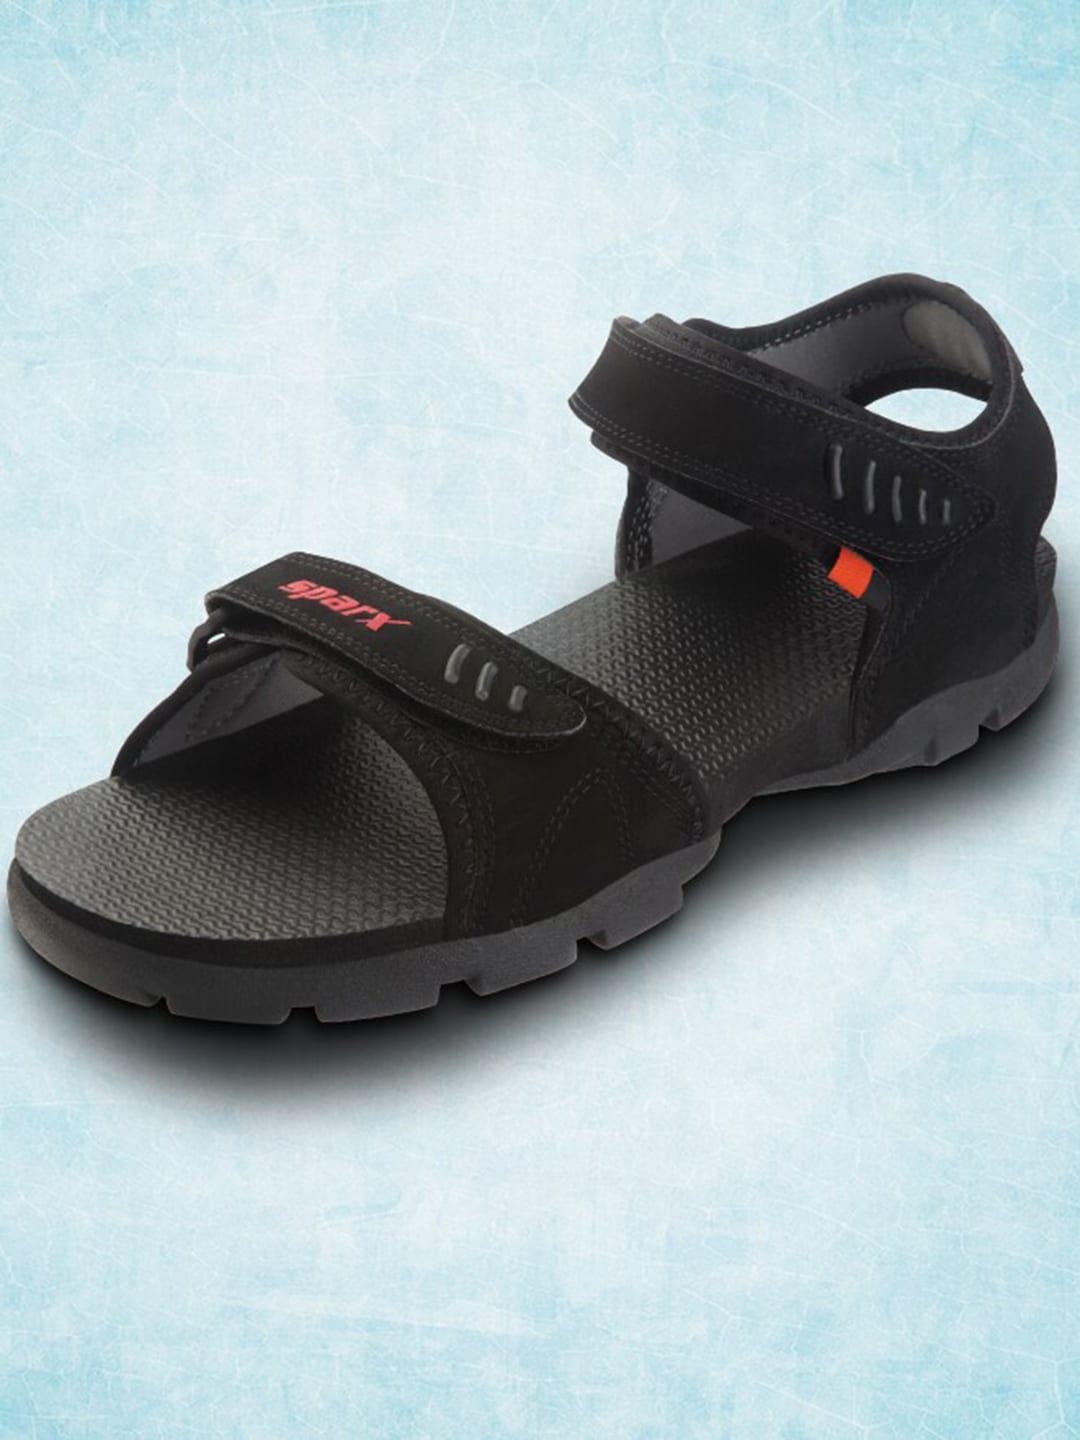 Sparx Synthetic Leather 6 Sandals - Get Best Price from Manufacturers &  Suppliers in India